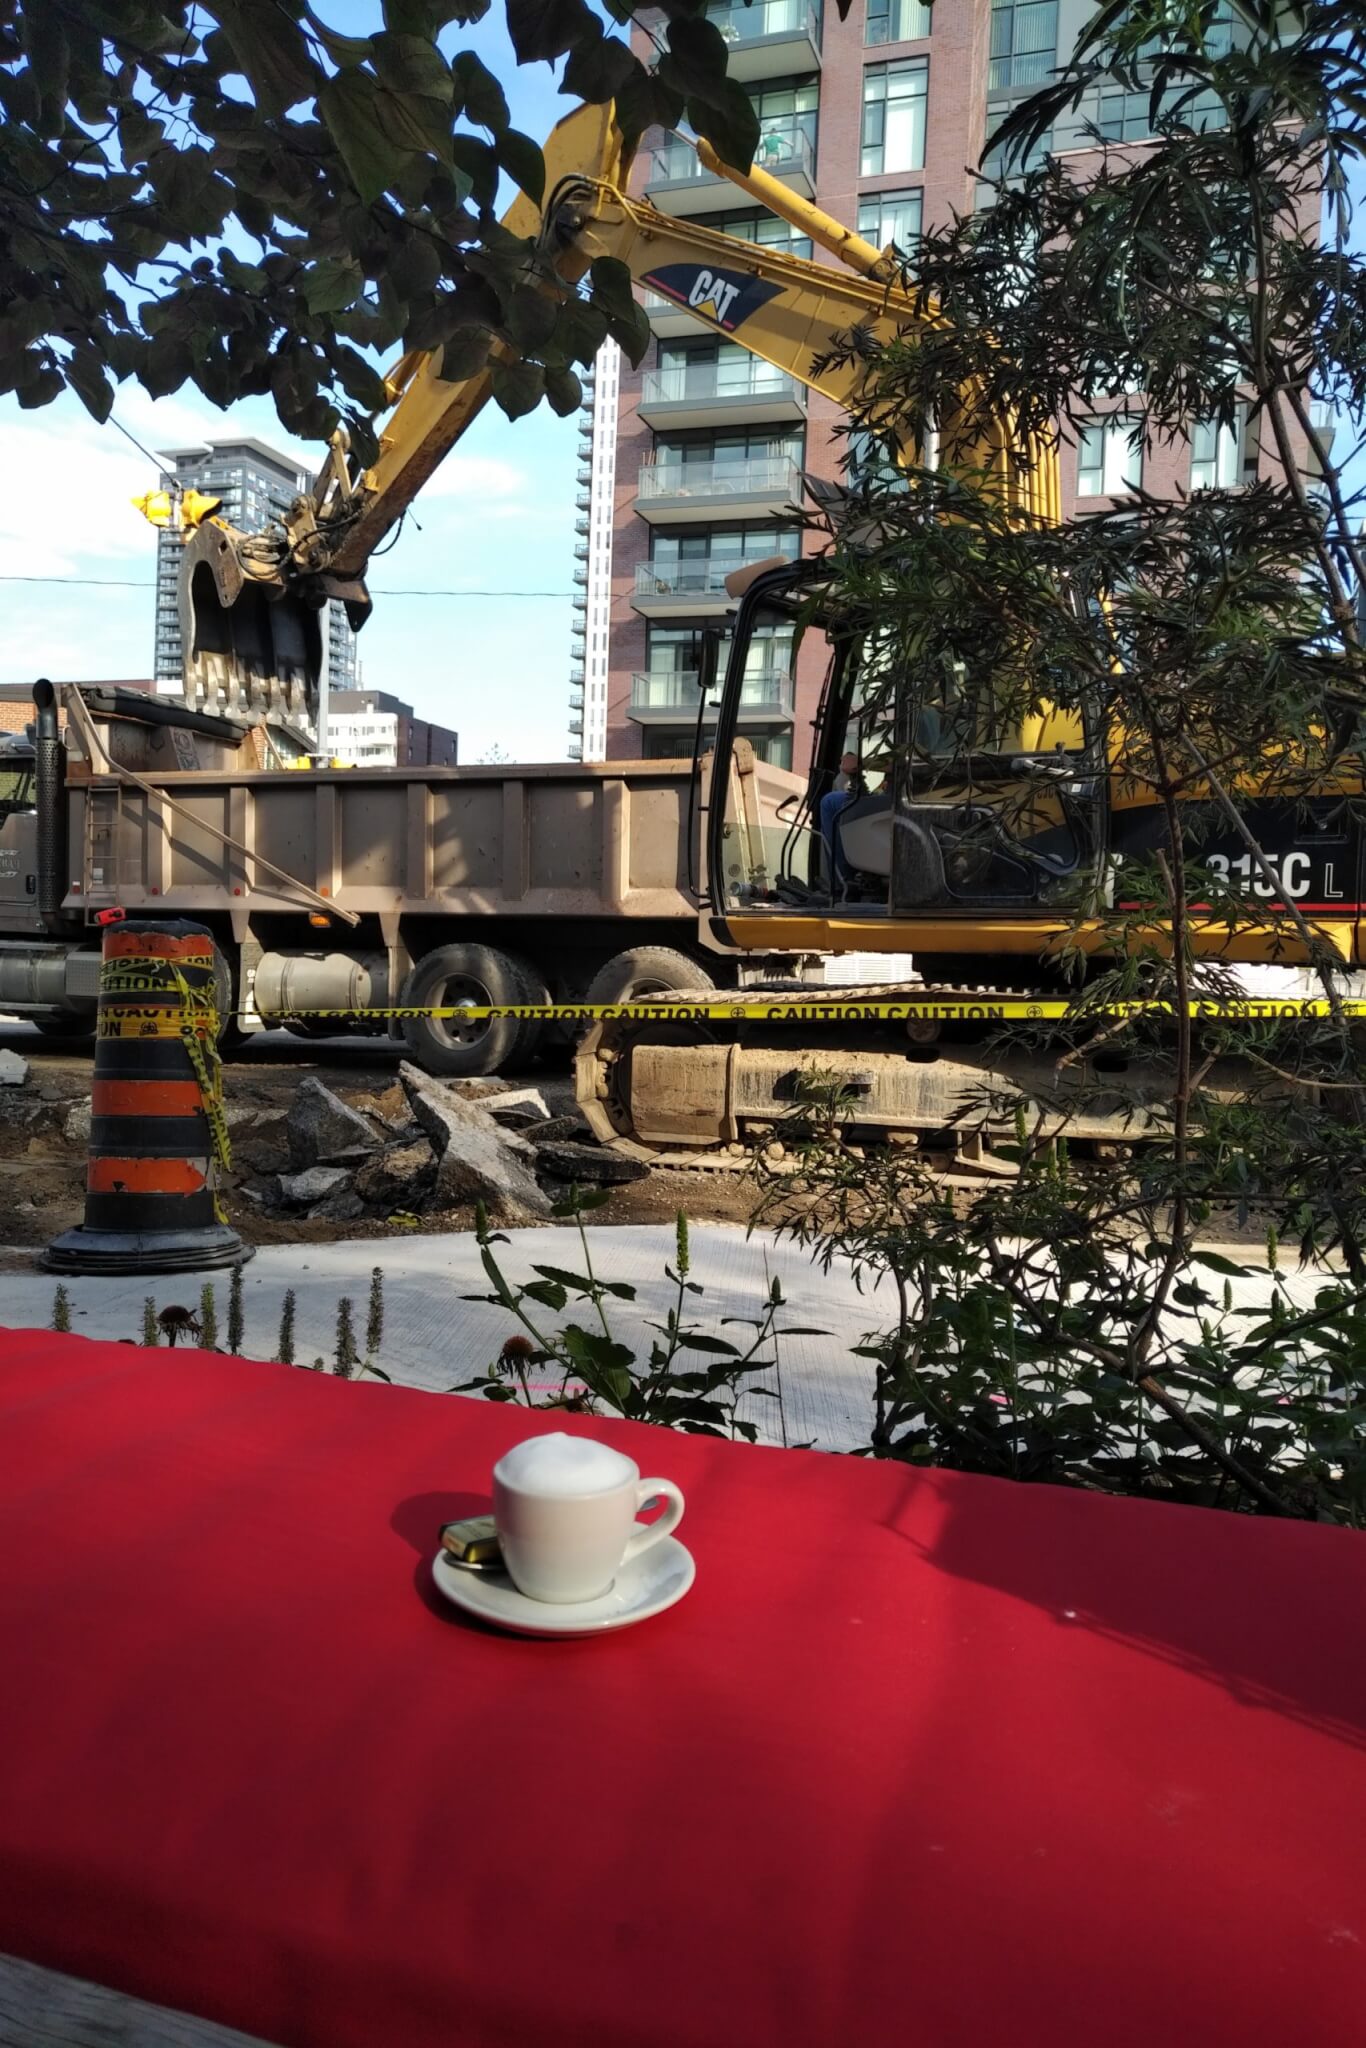 A small coffee on a bench in front of a backhoe digging up a road